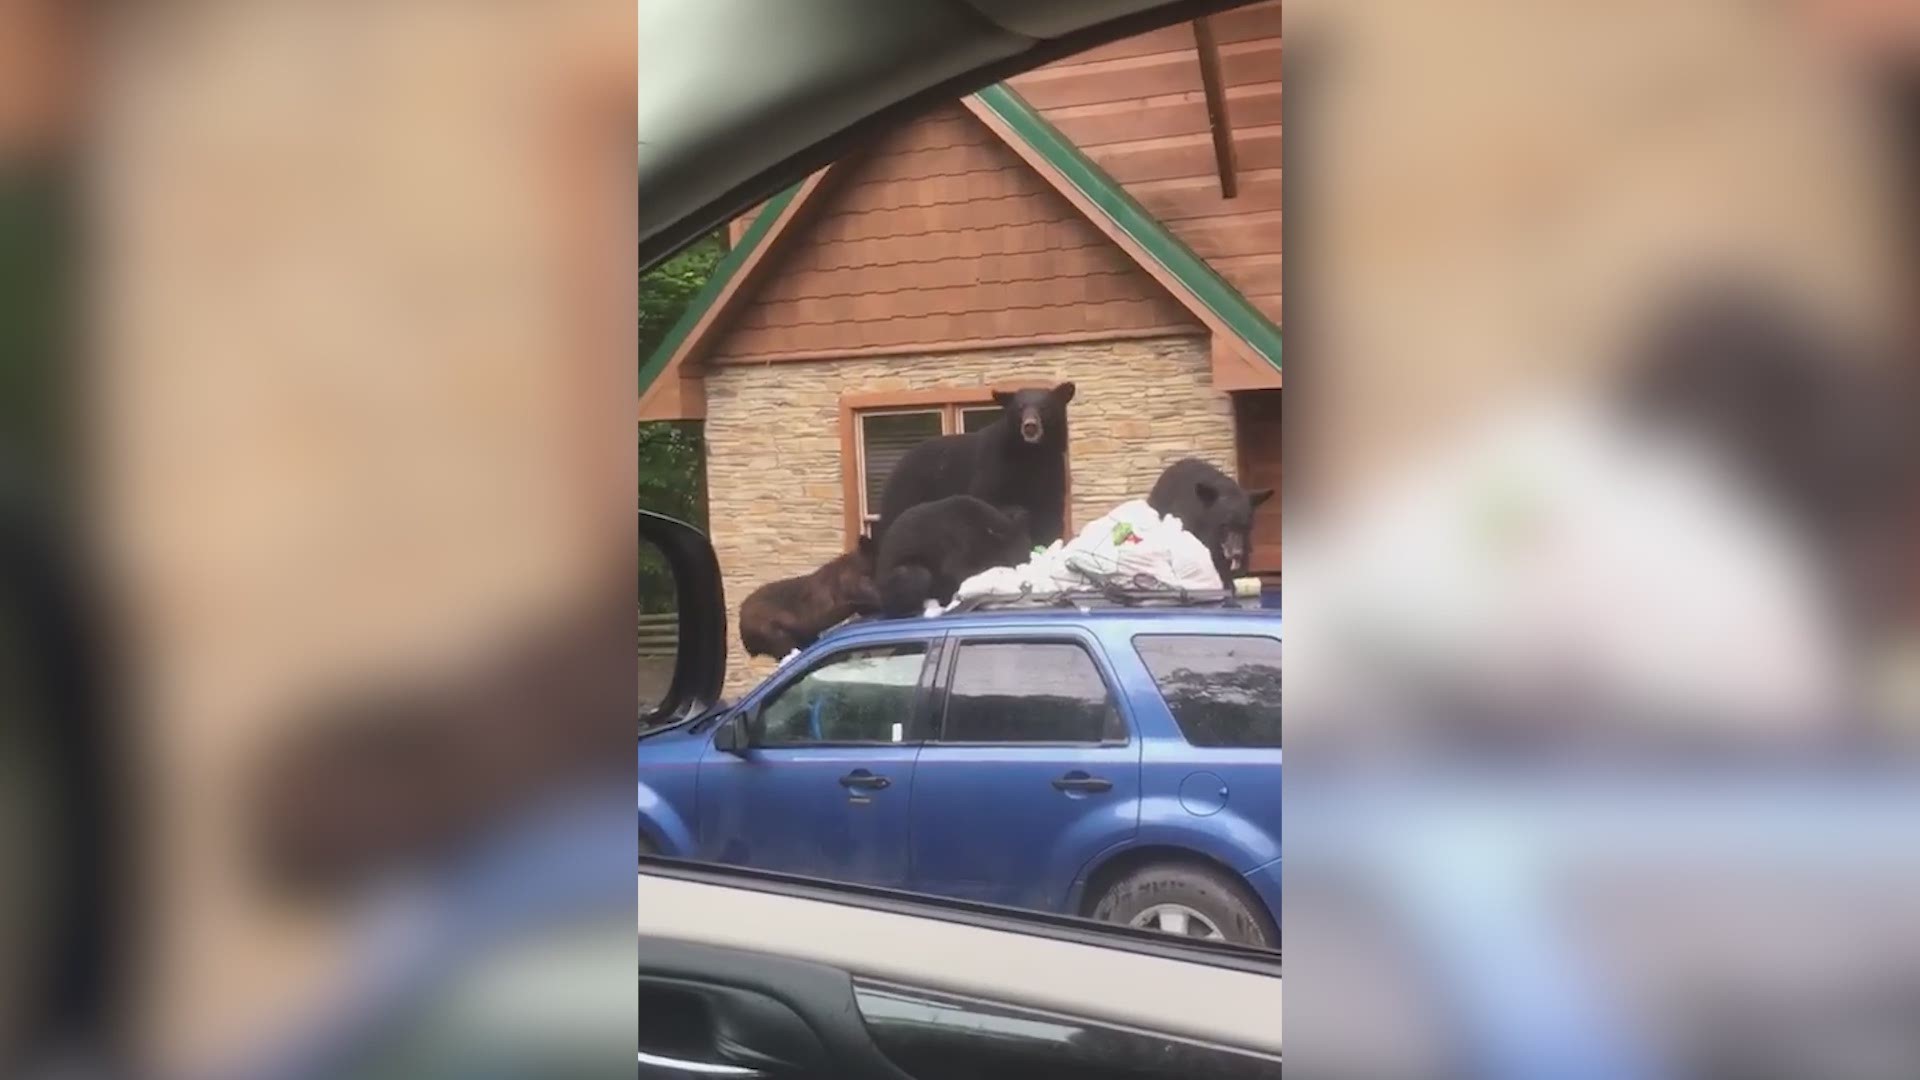 A viewer spotted a mama bear and her three cubs digging into trash in Gatlinburg.